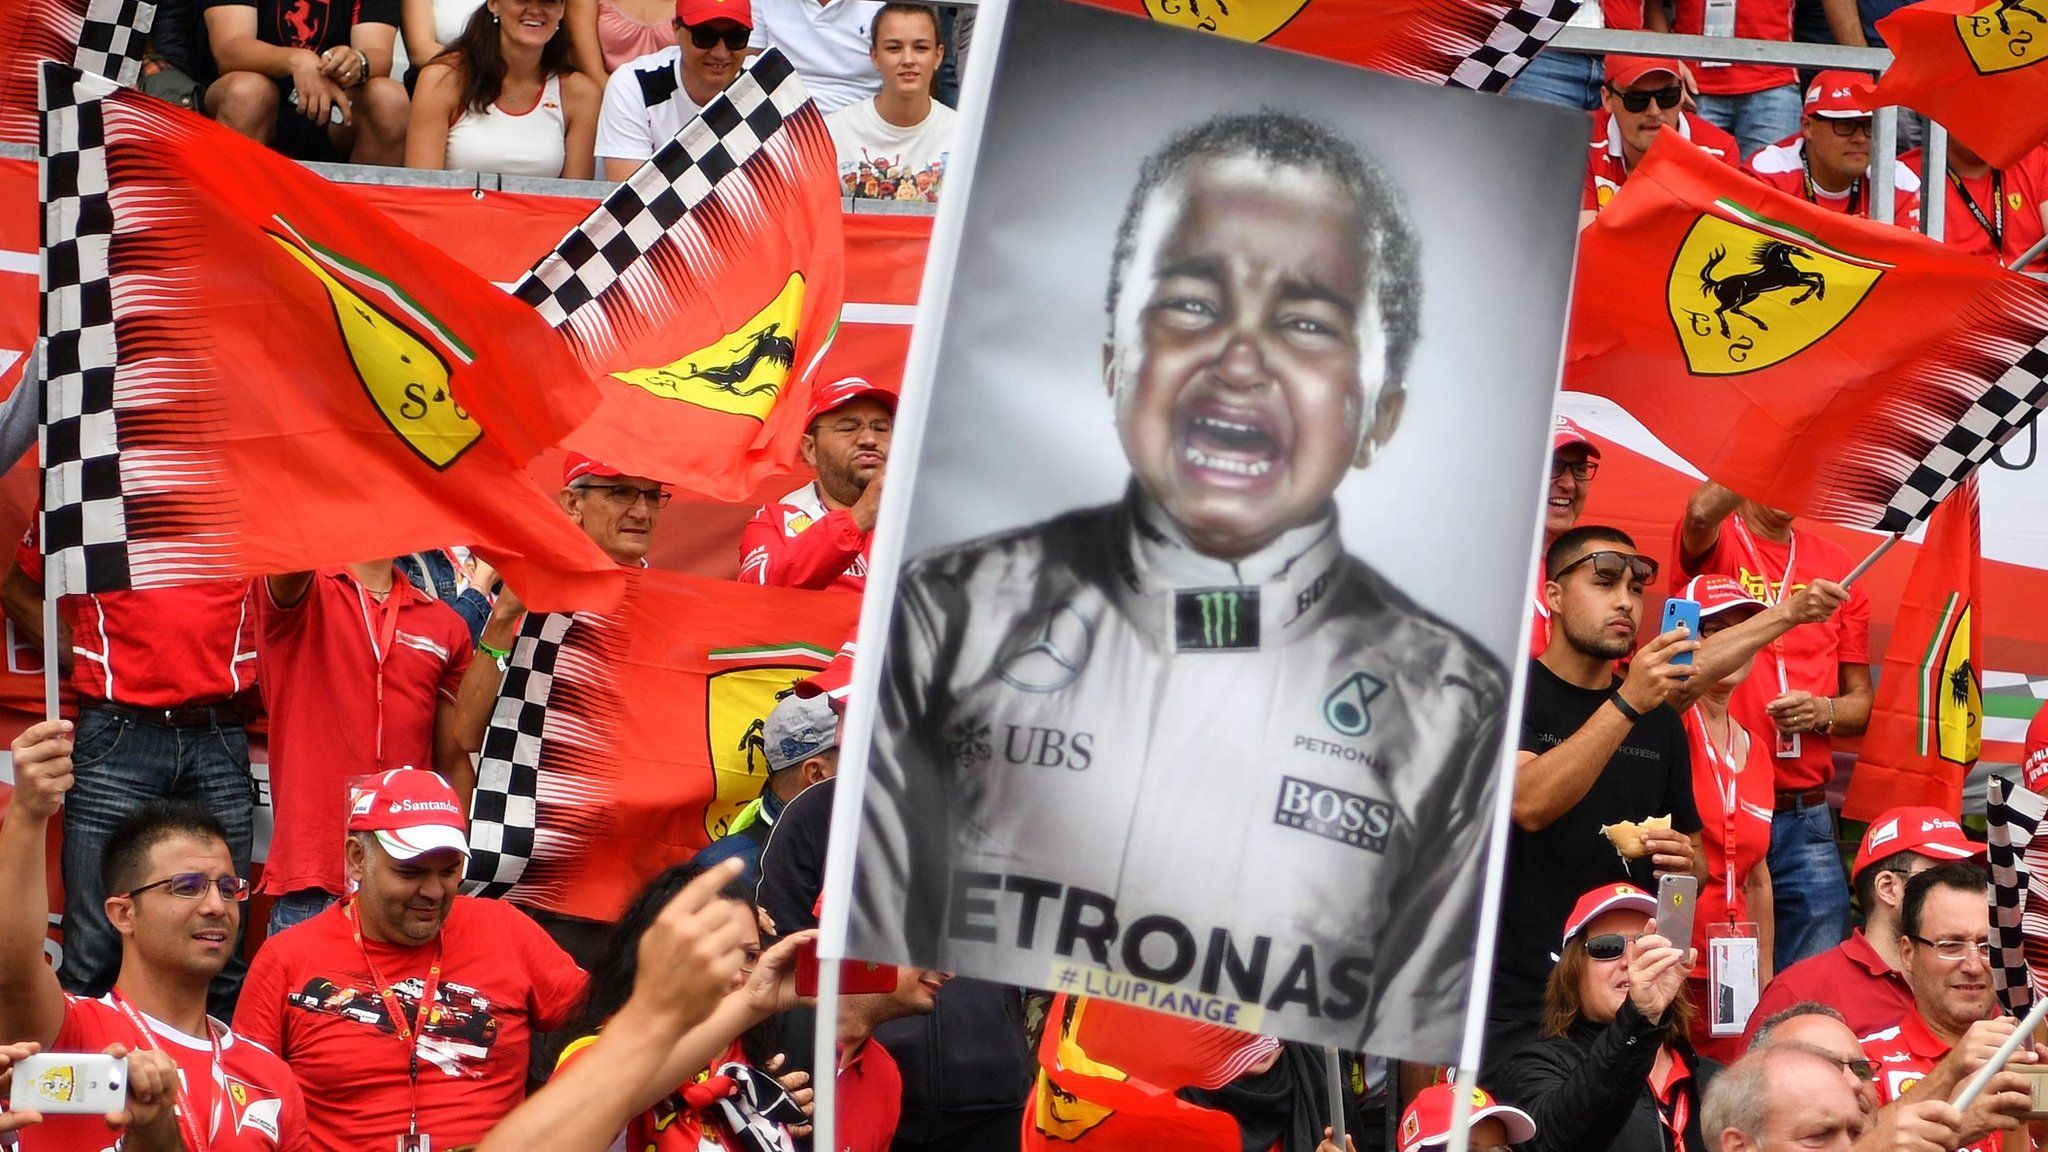 Ferrari fans hold up a sign of a crying Lewis Hamilton